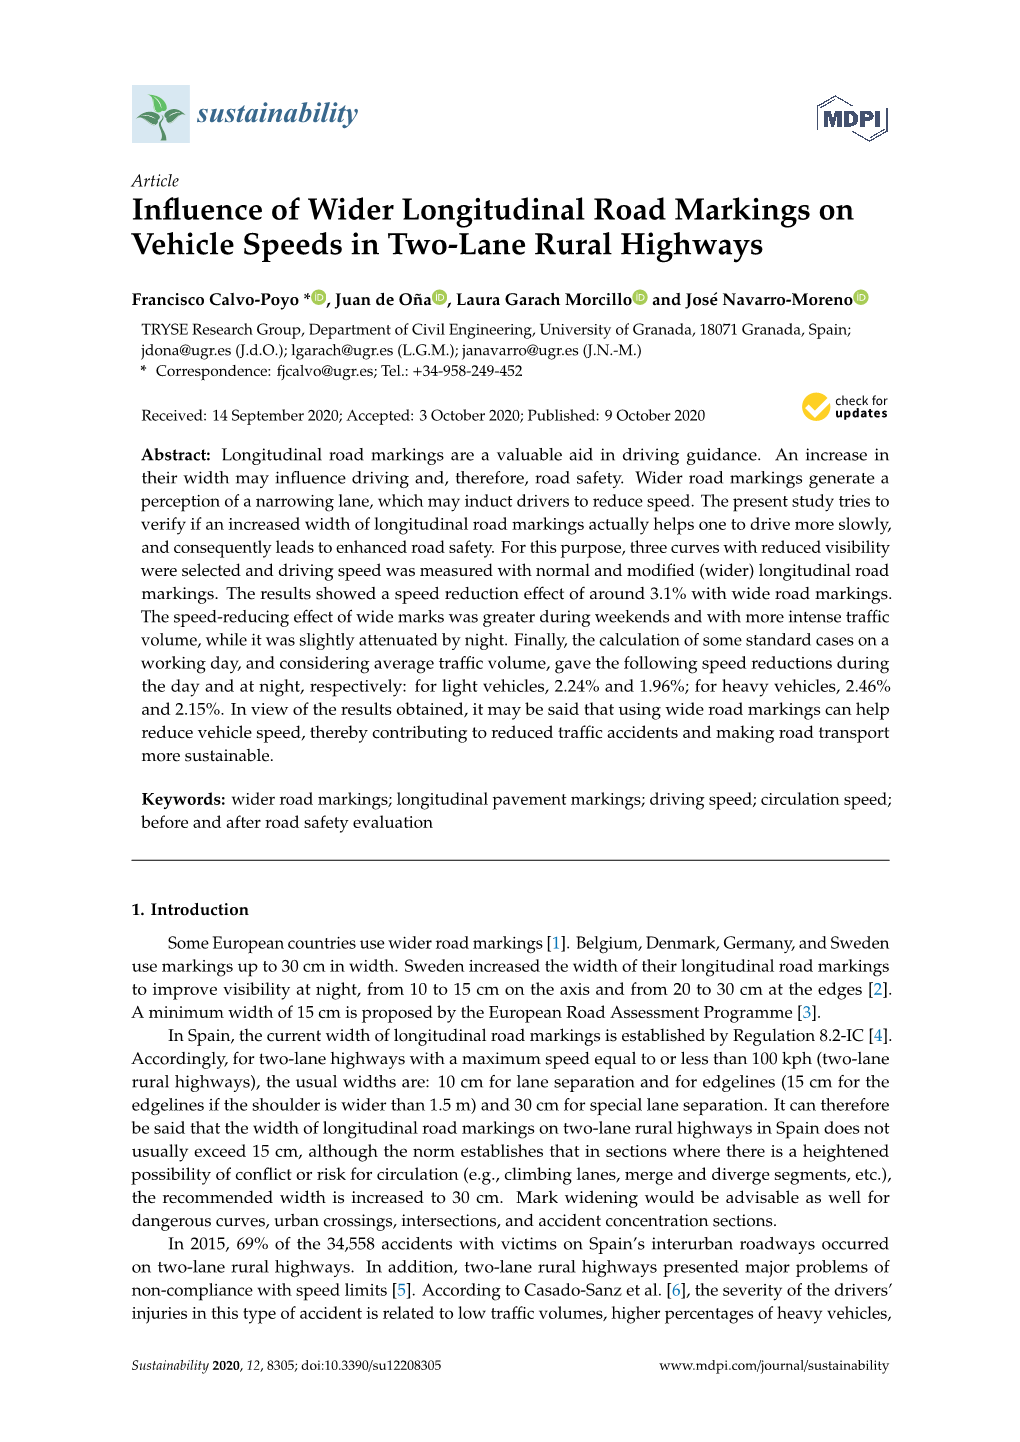 Influence of Wider Longitudinal Road Markings on Vehicle Speeds in Two